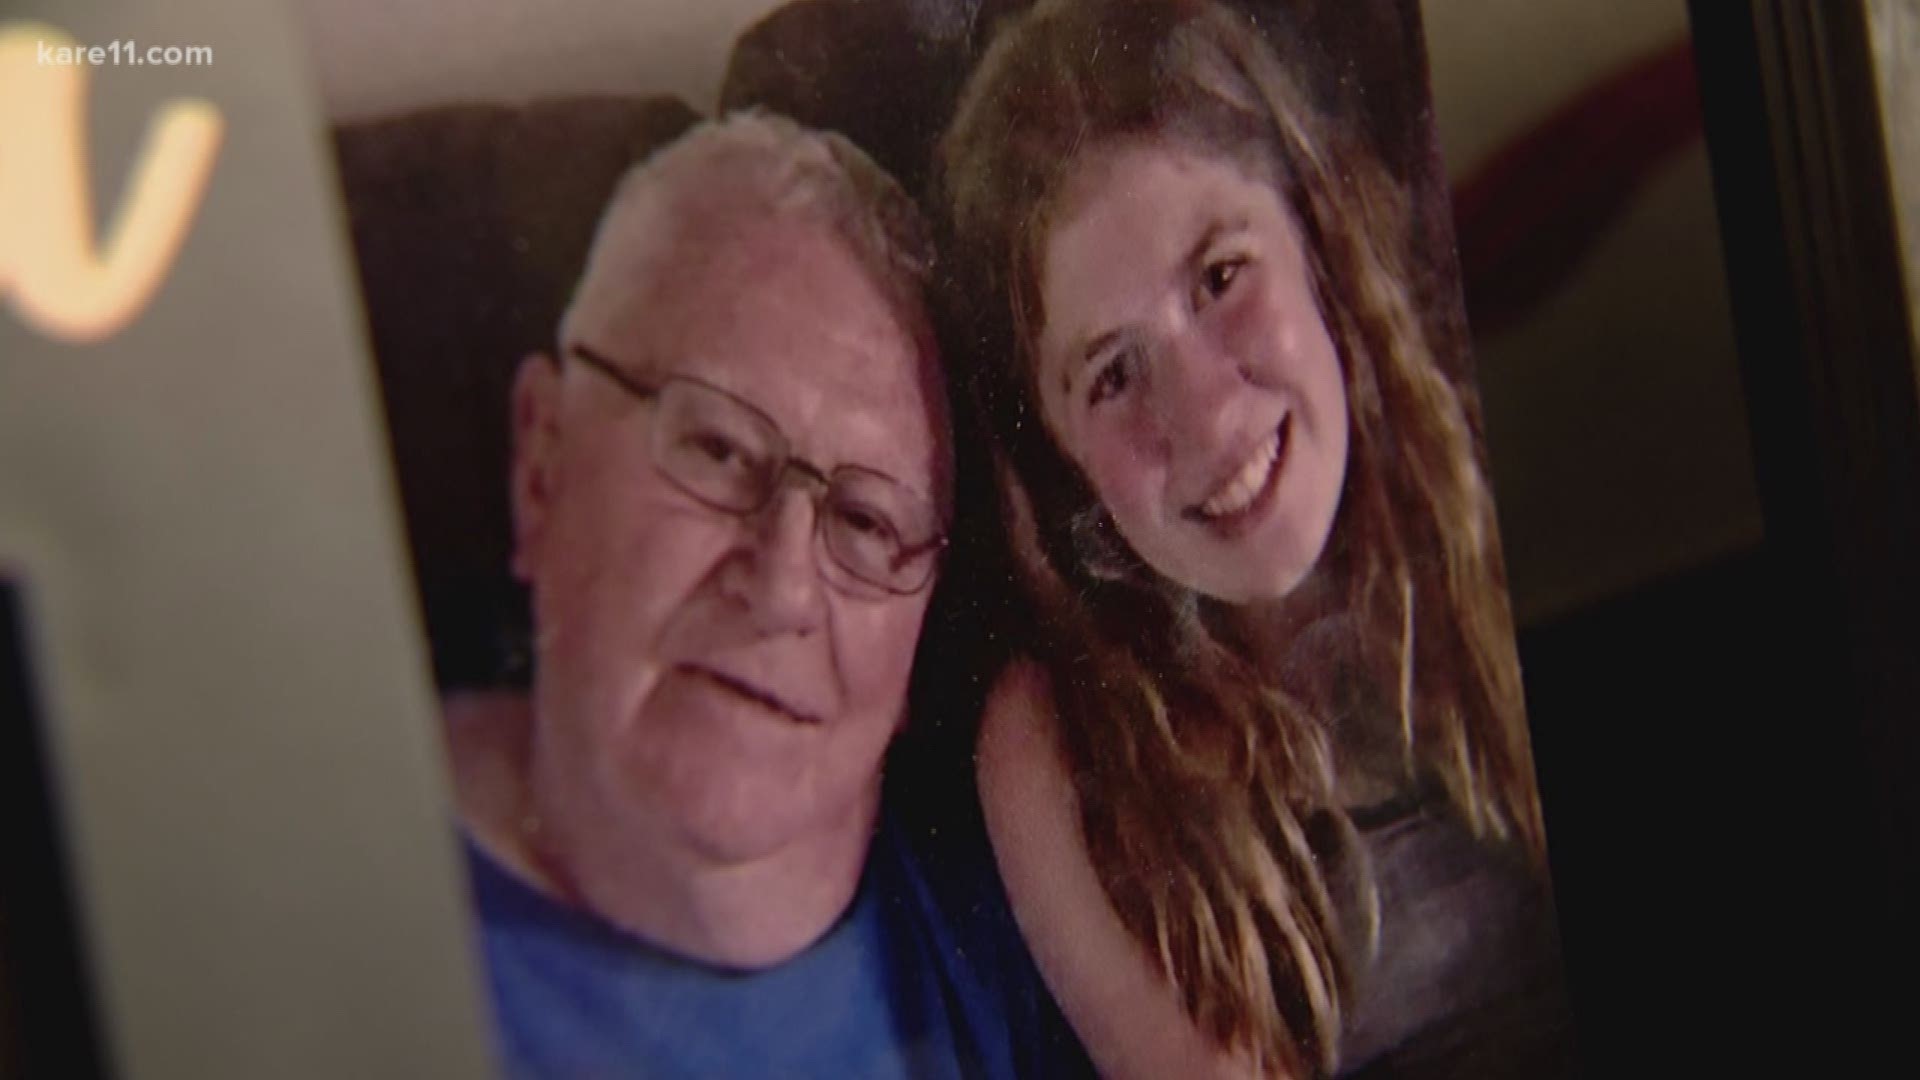 The grandfather of Jayme Closs says the 13-year-old is doing well considering what she went through after she was kidnapped and missing for 88 days.